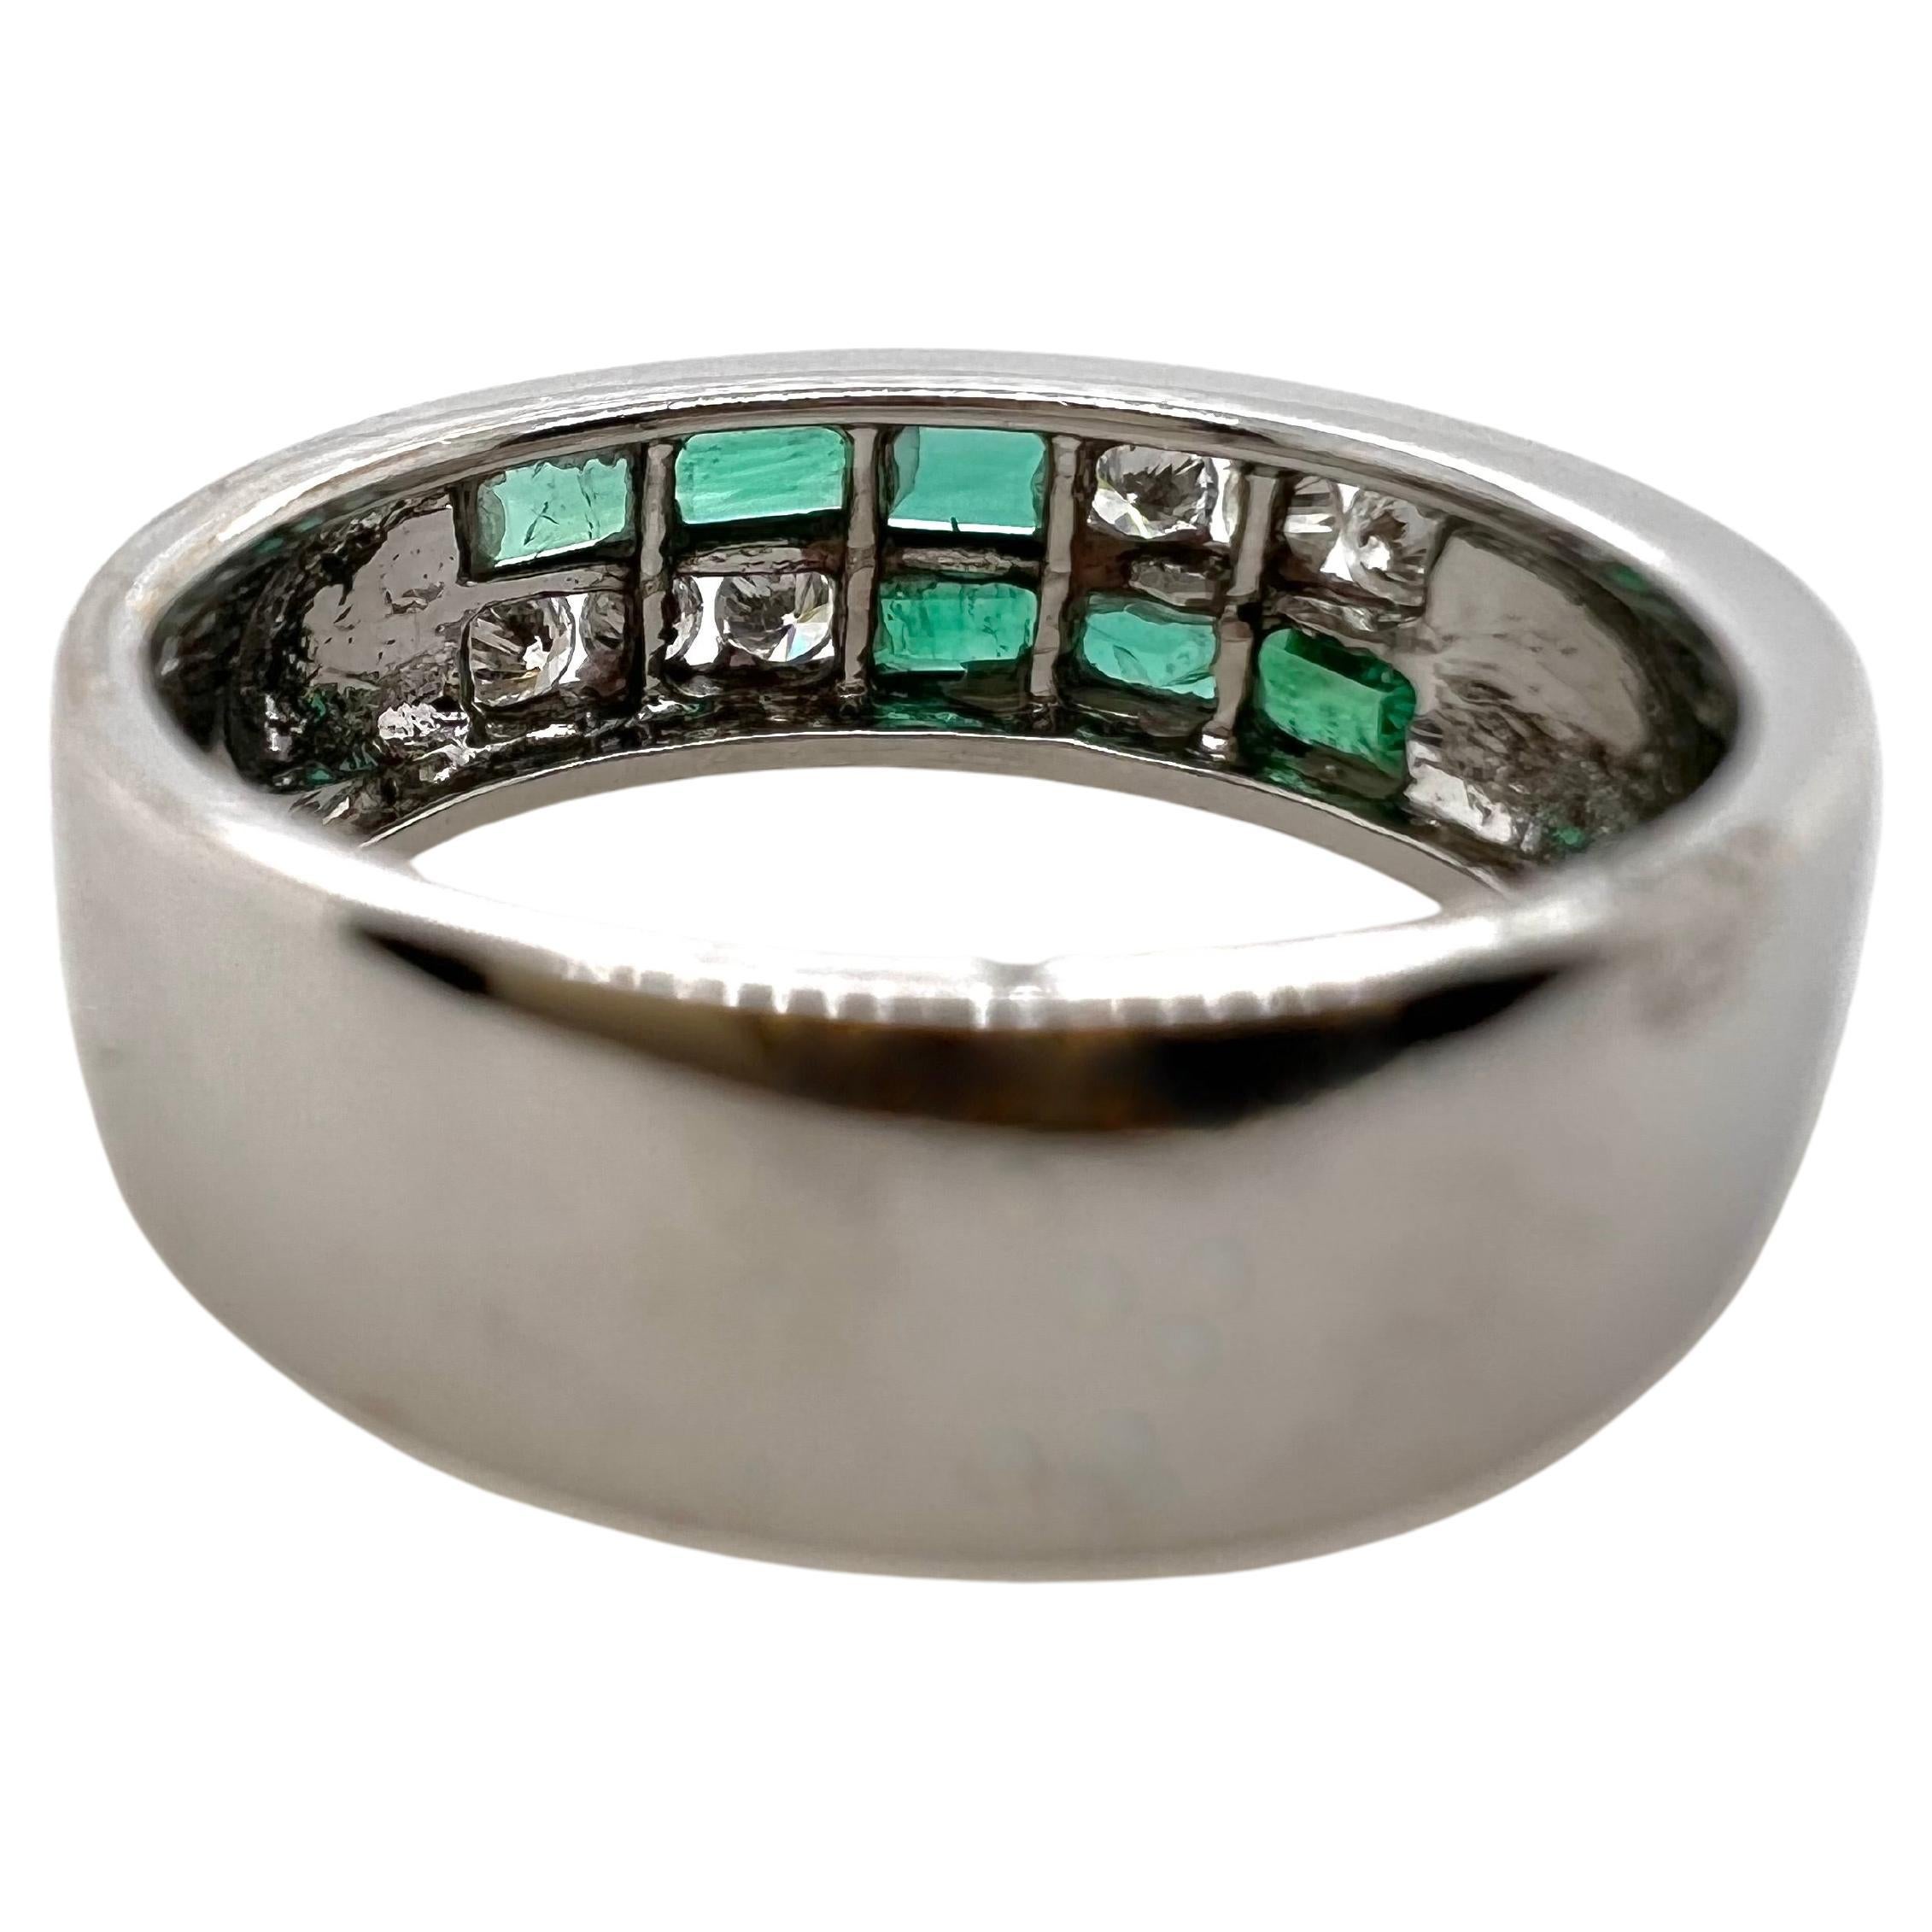 This contemporary emerald and diamond band will grasp everyone's attention for its sleek, modern lines.  The baguette emerald are channeled set with the brilliant round diamonds in this low profile band ring.


Size: 8.75 / can be sized
Stone: